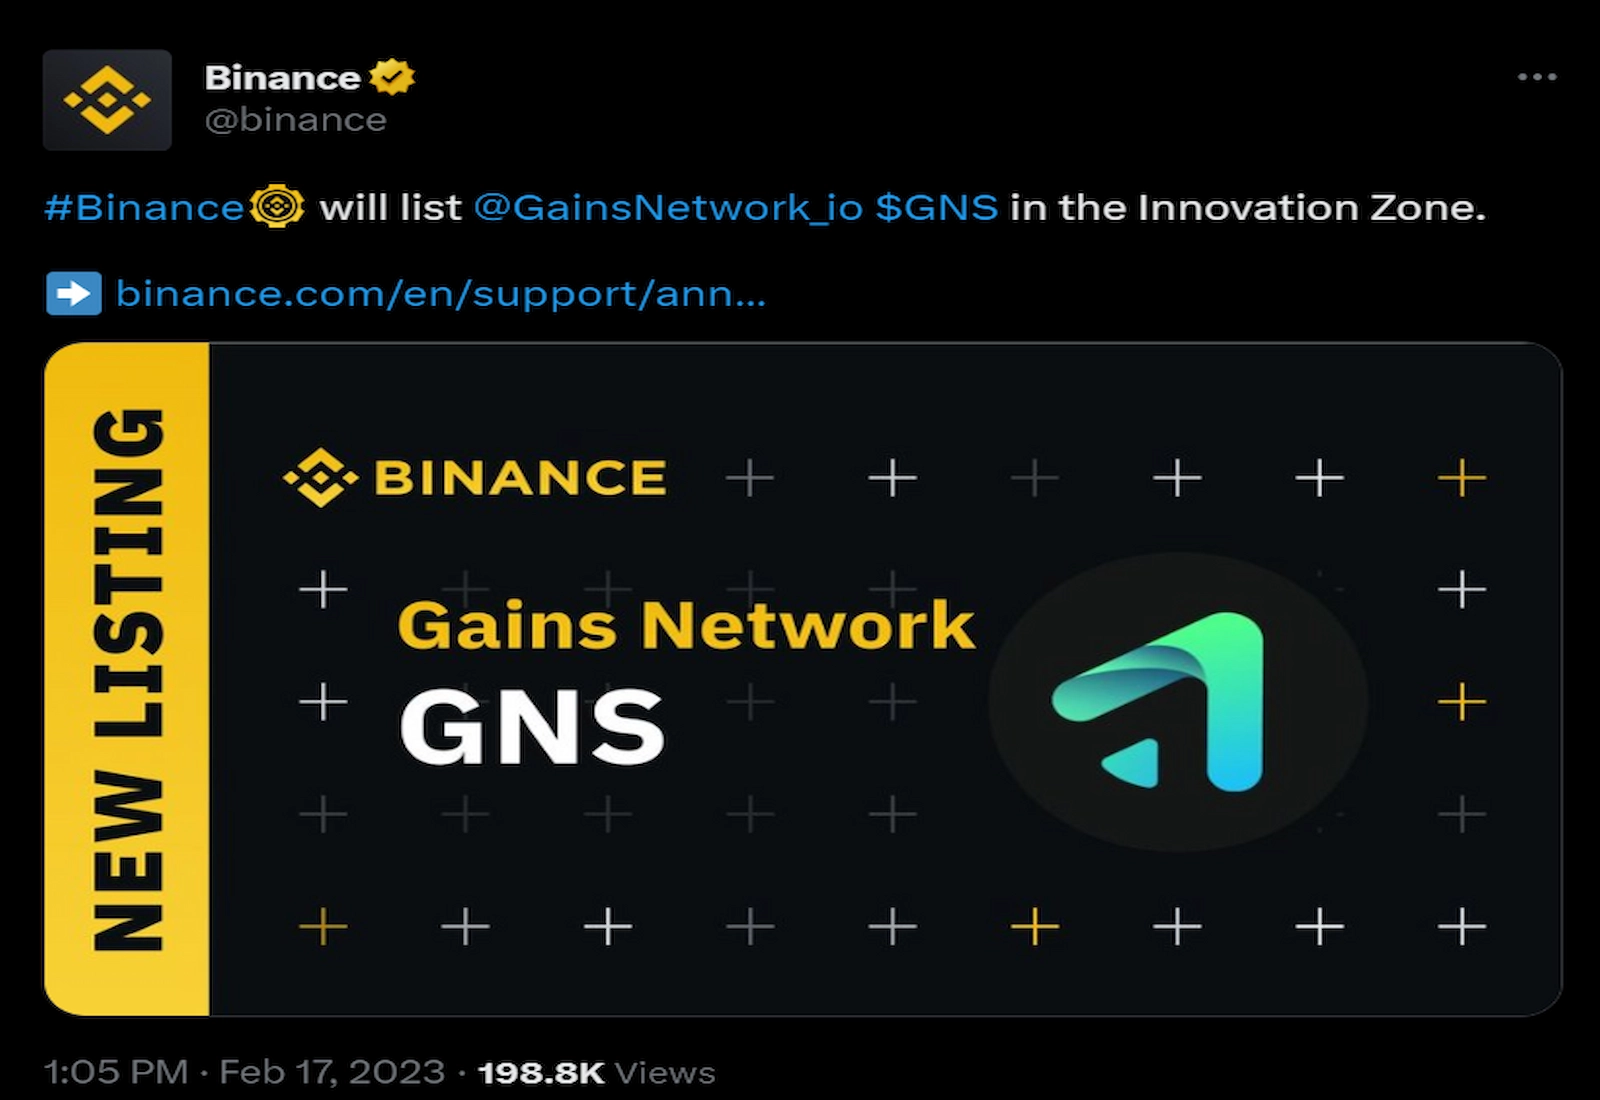 The GNS Binance listing announcement propelled Gains Network prices.